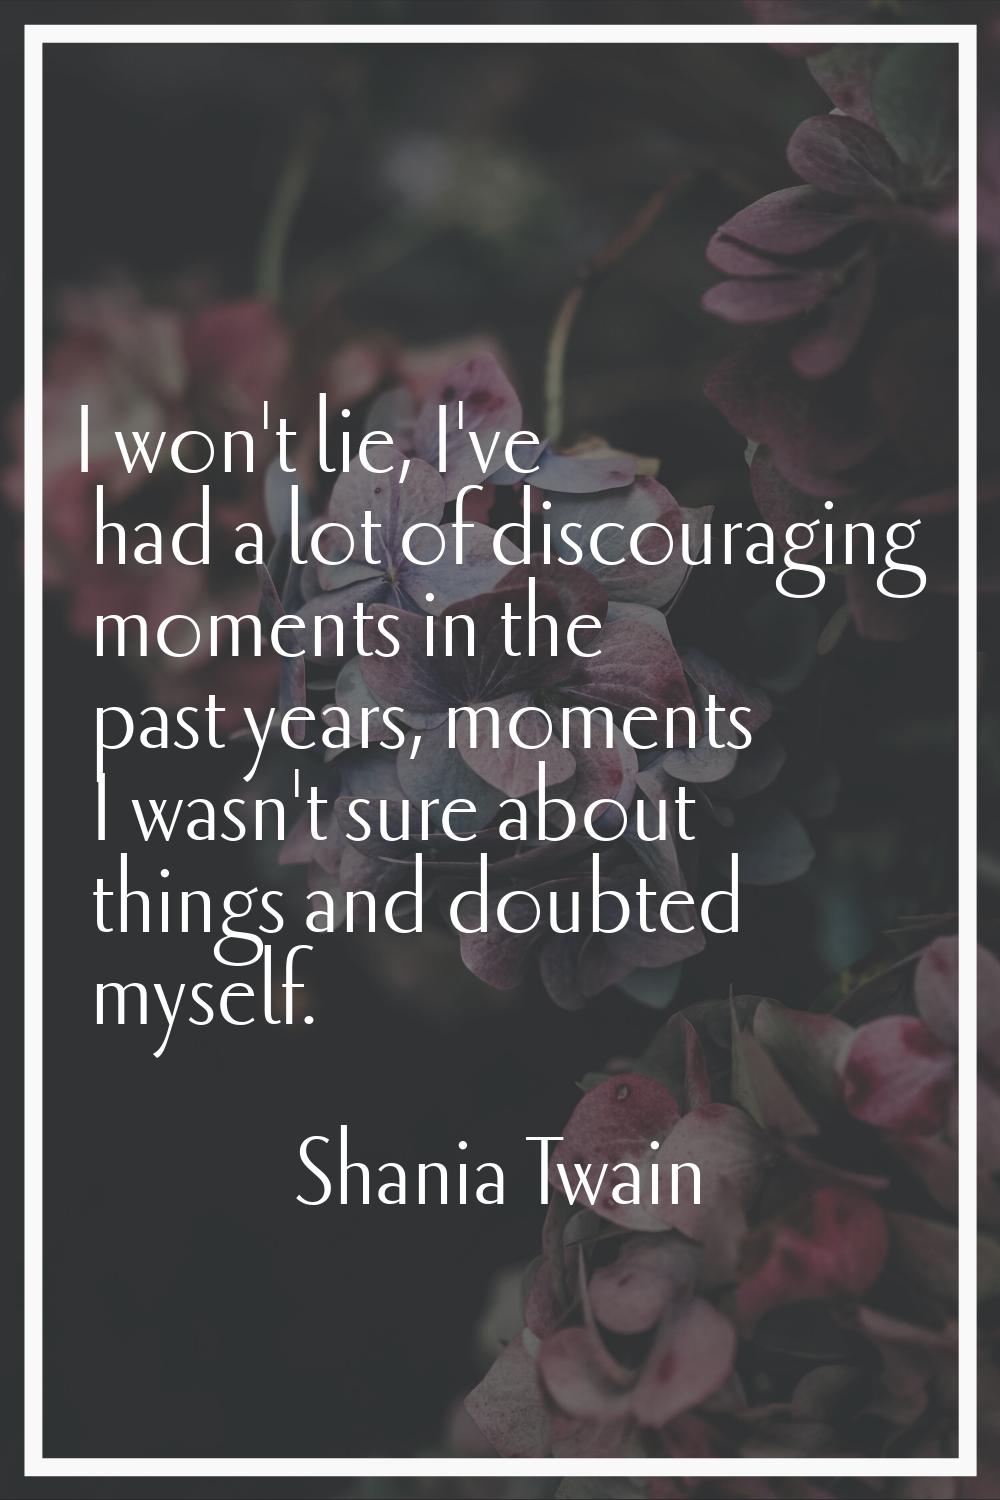 I won't lie, I've had a lot of discouraging moments in the past years, moments I wasn't sure about 